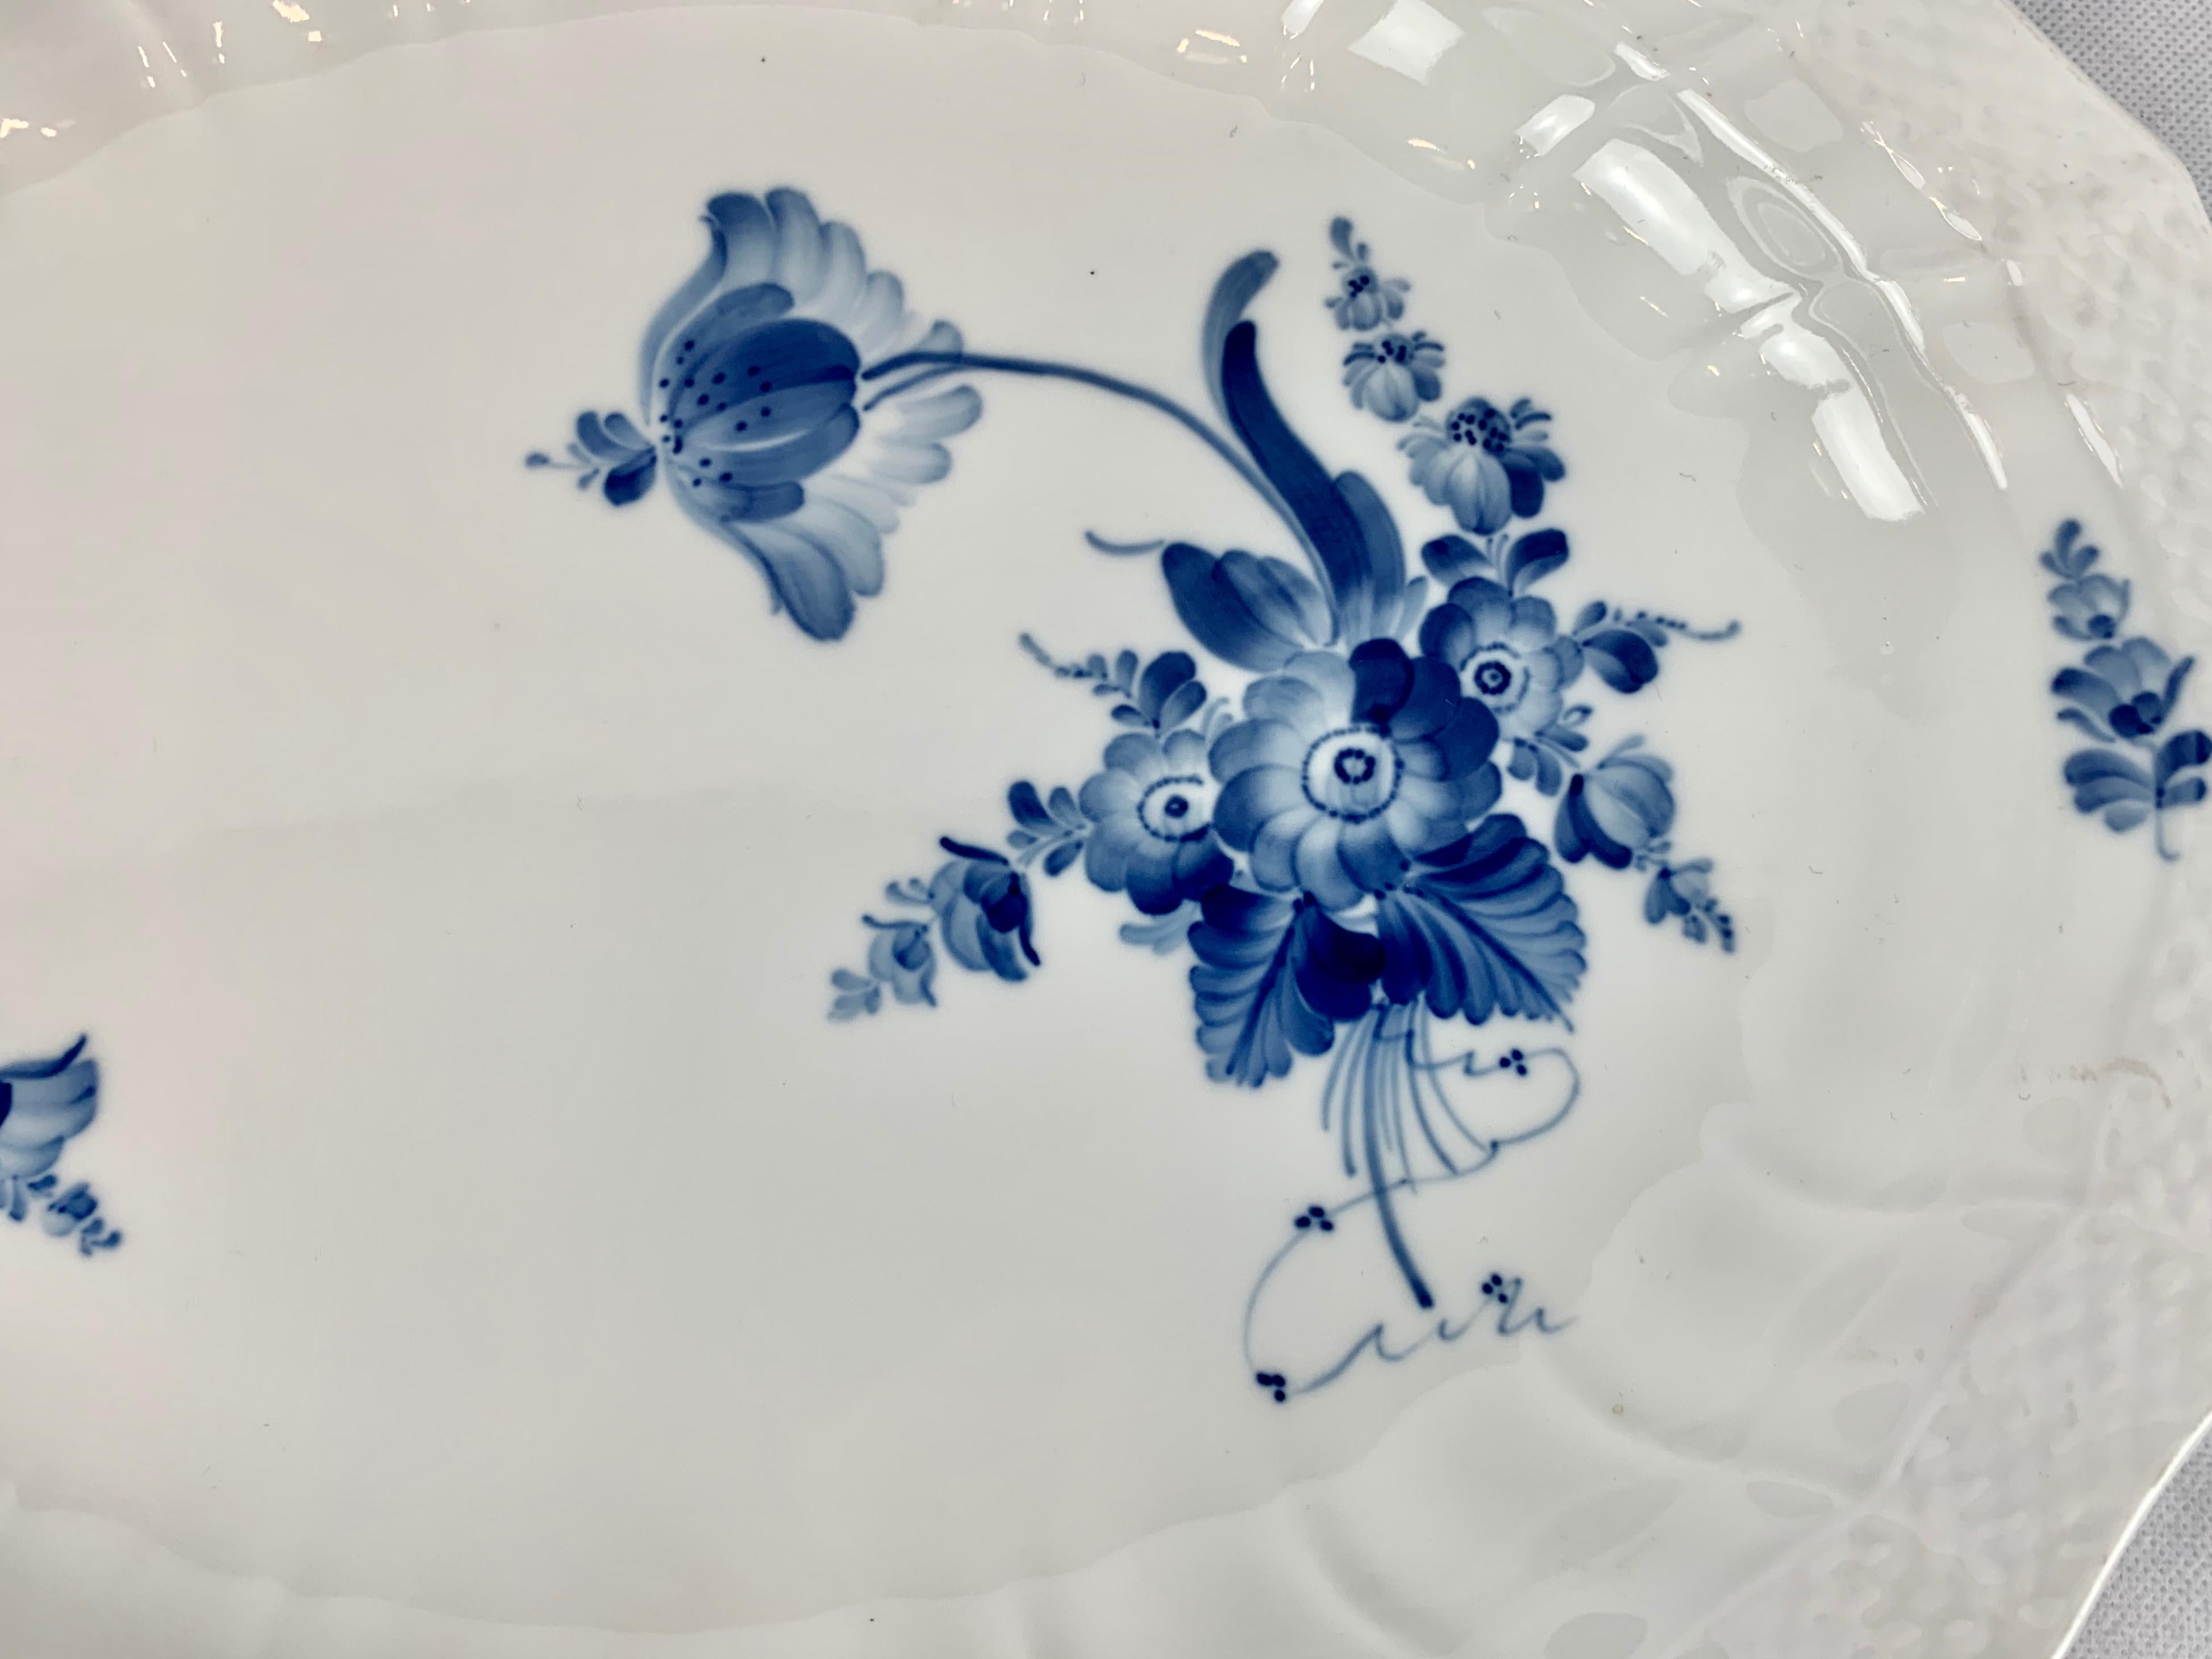 This large oval porcelain platter by Royal Copenhagen in the Rococo style is referred to as blue flower-curve. It was hand decorated in this dazzling cobalt blue. The 